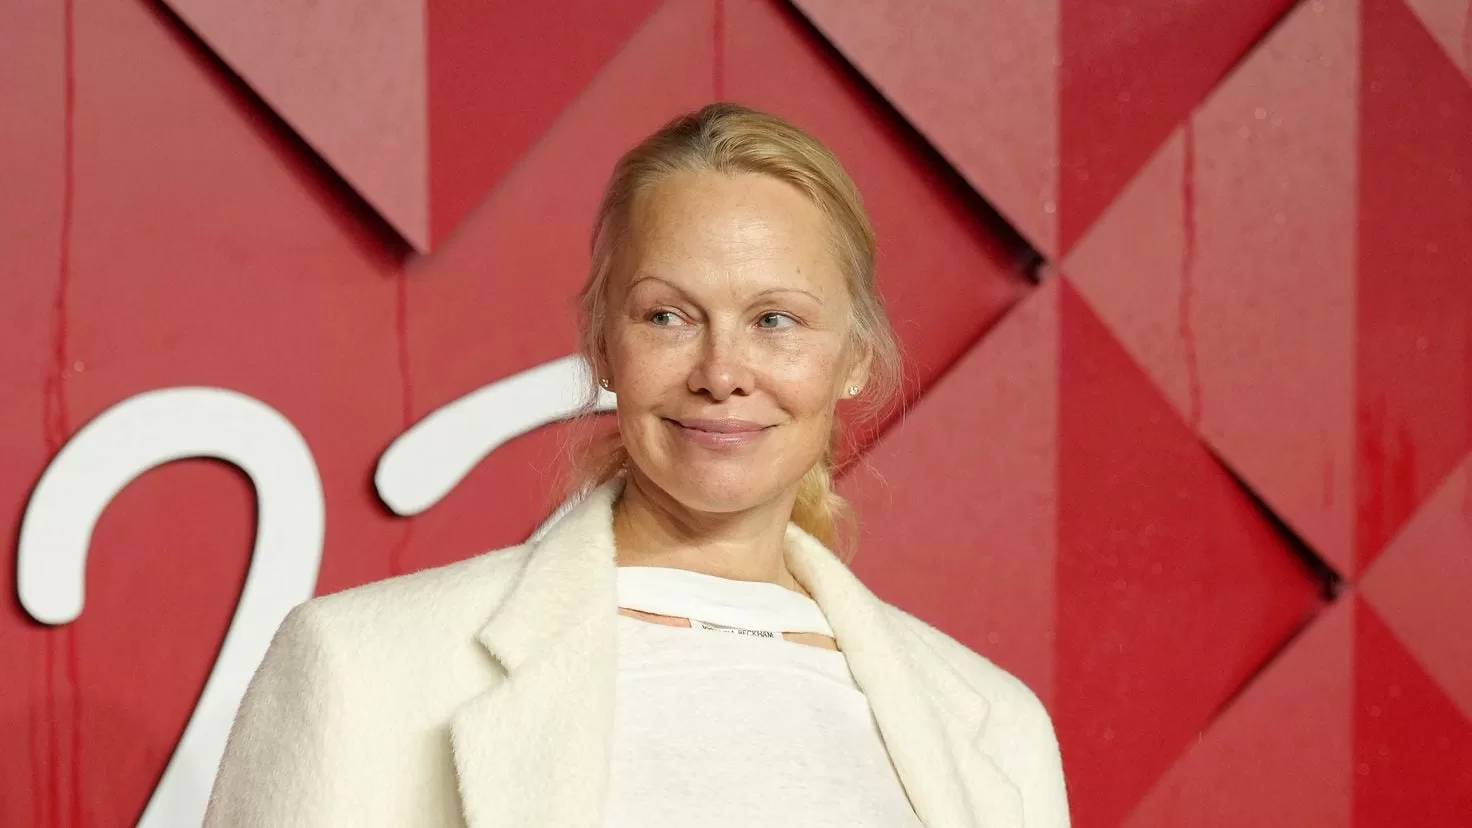 Pamela Anderson reappears with a surprising physical change: It's freedom, it's a relief
